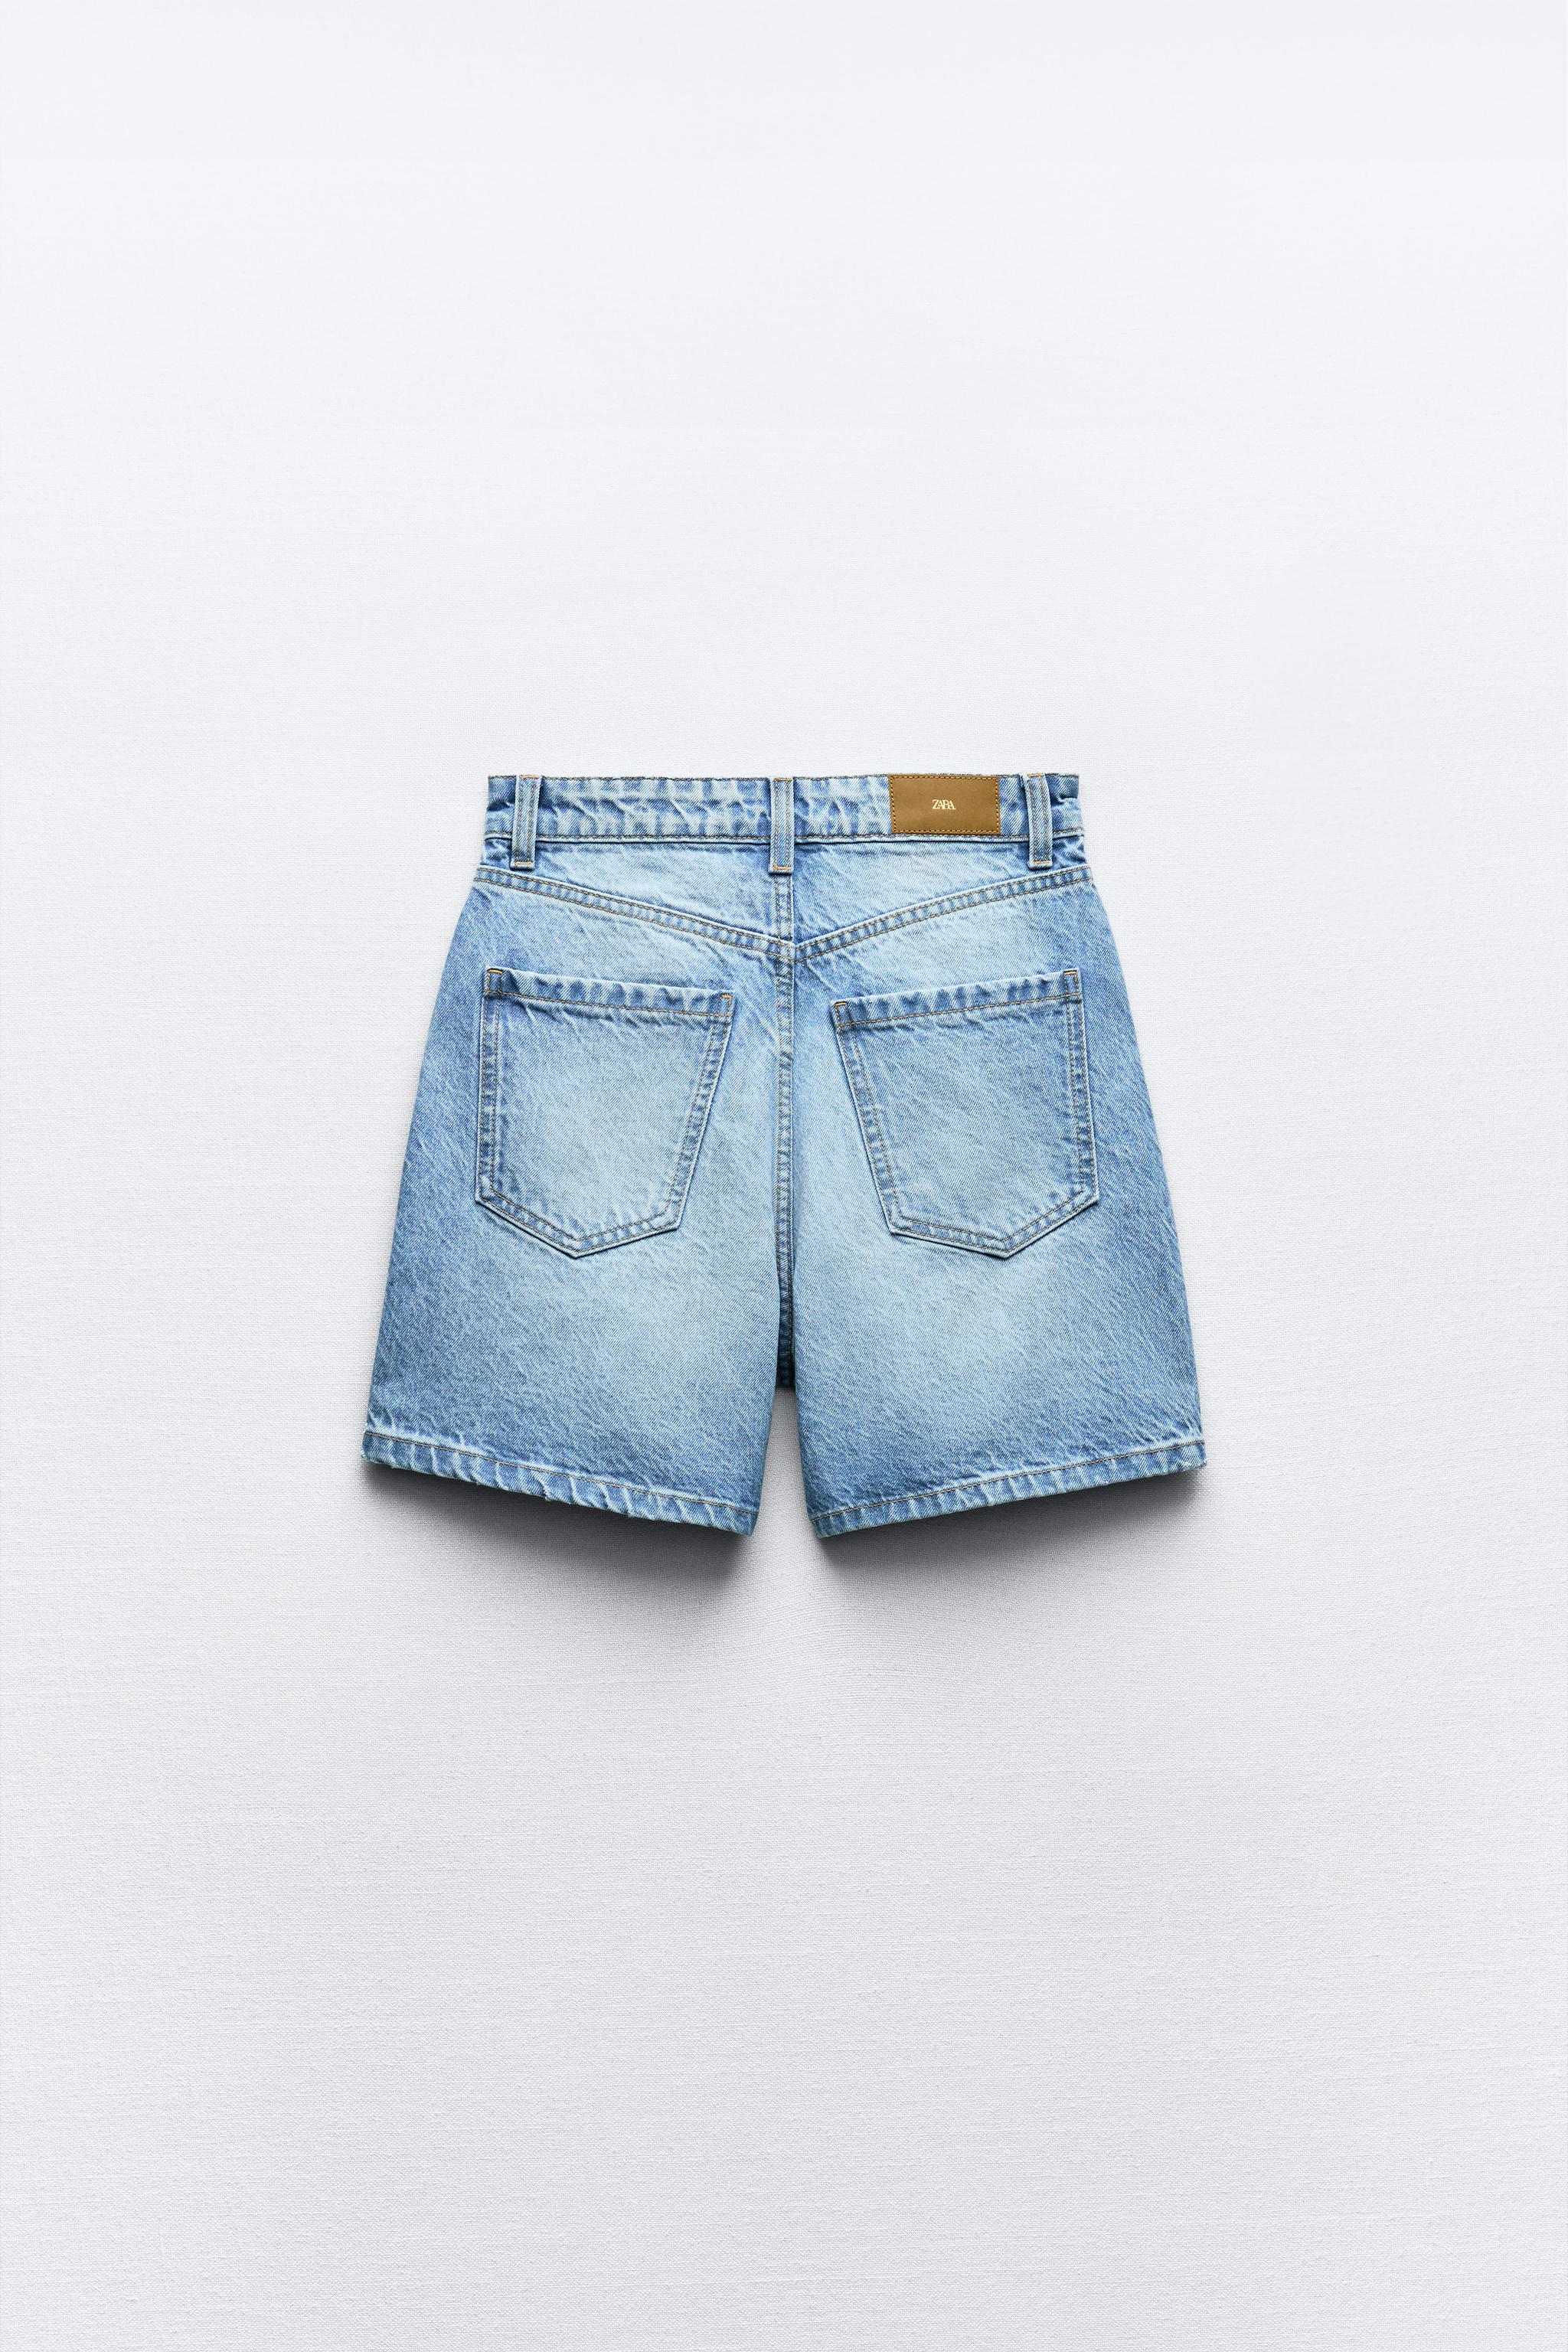 Z1975 HIGH-WAISTED MOM FIT SHORTS - Mid-blue | ZARA United States